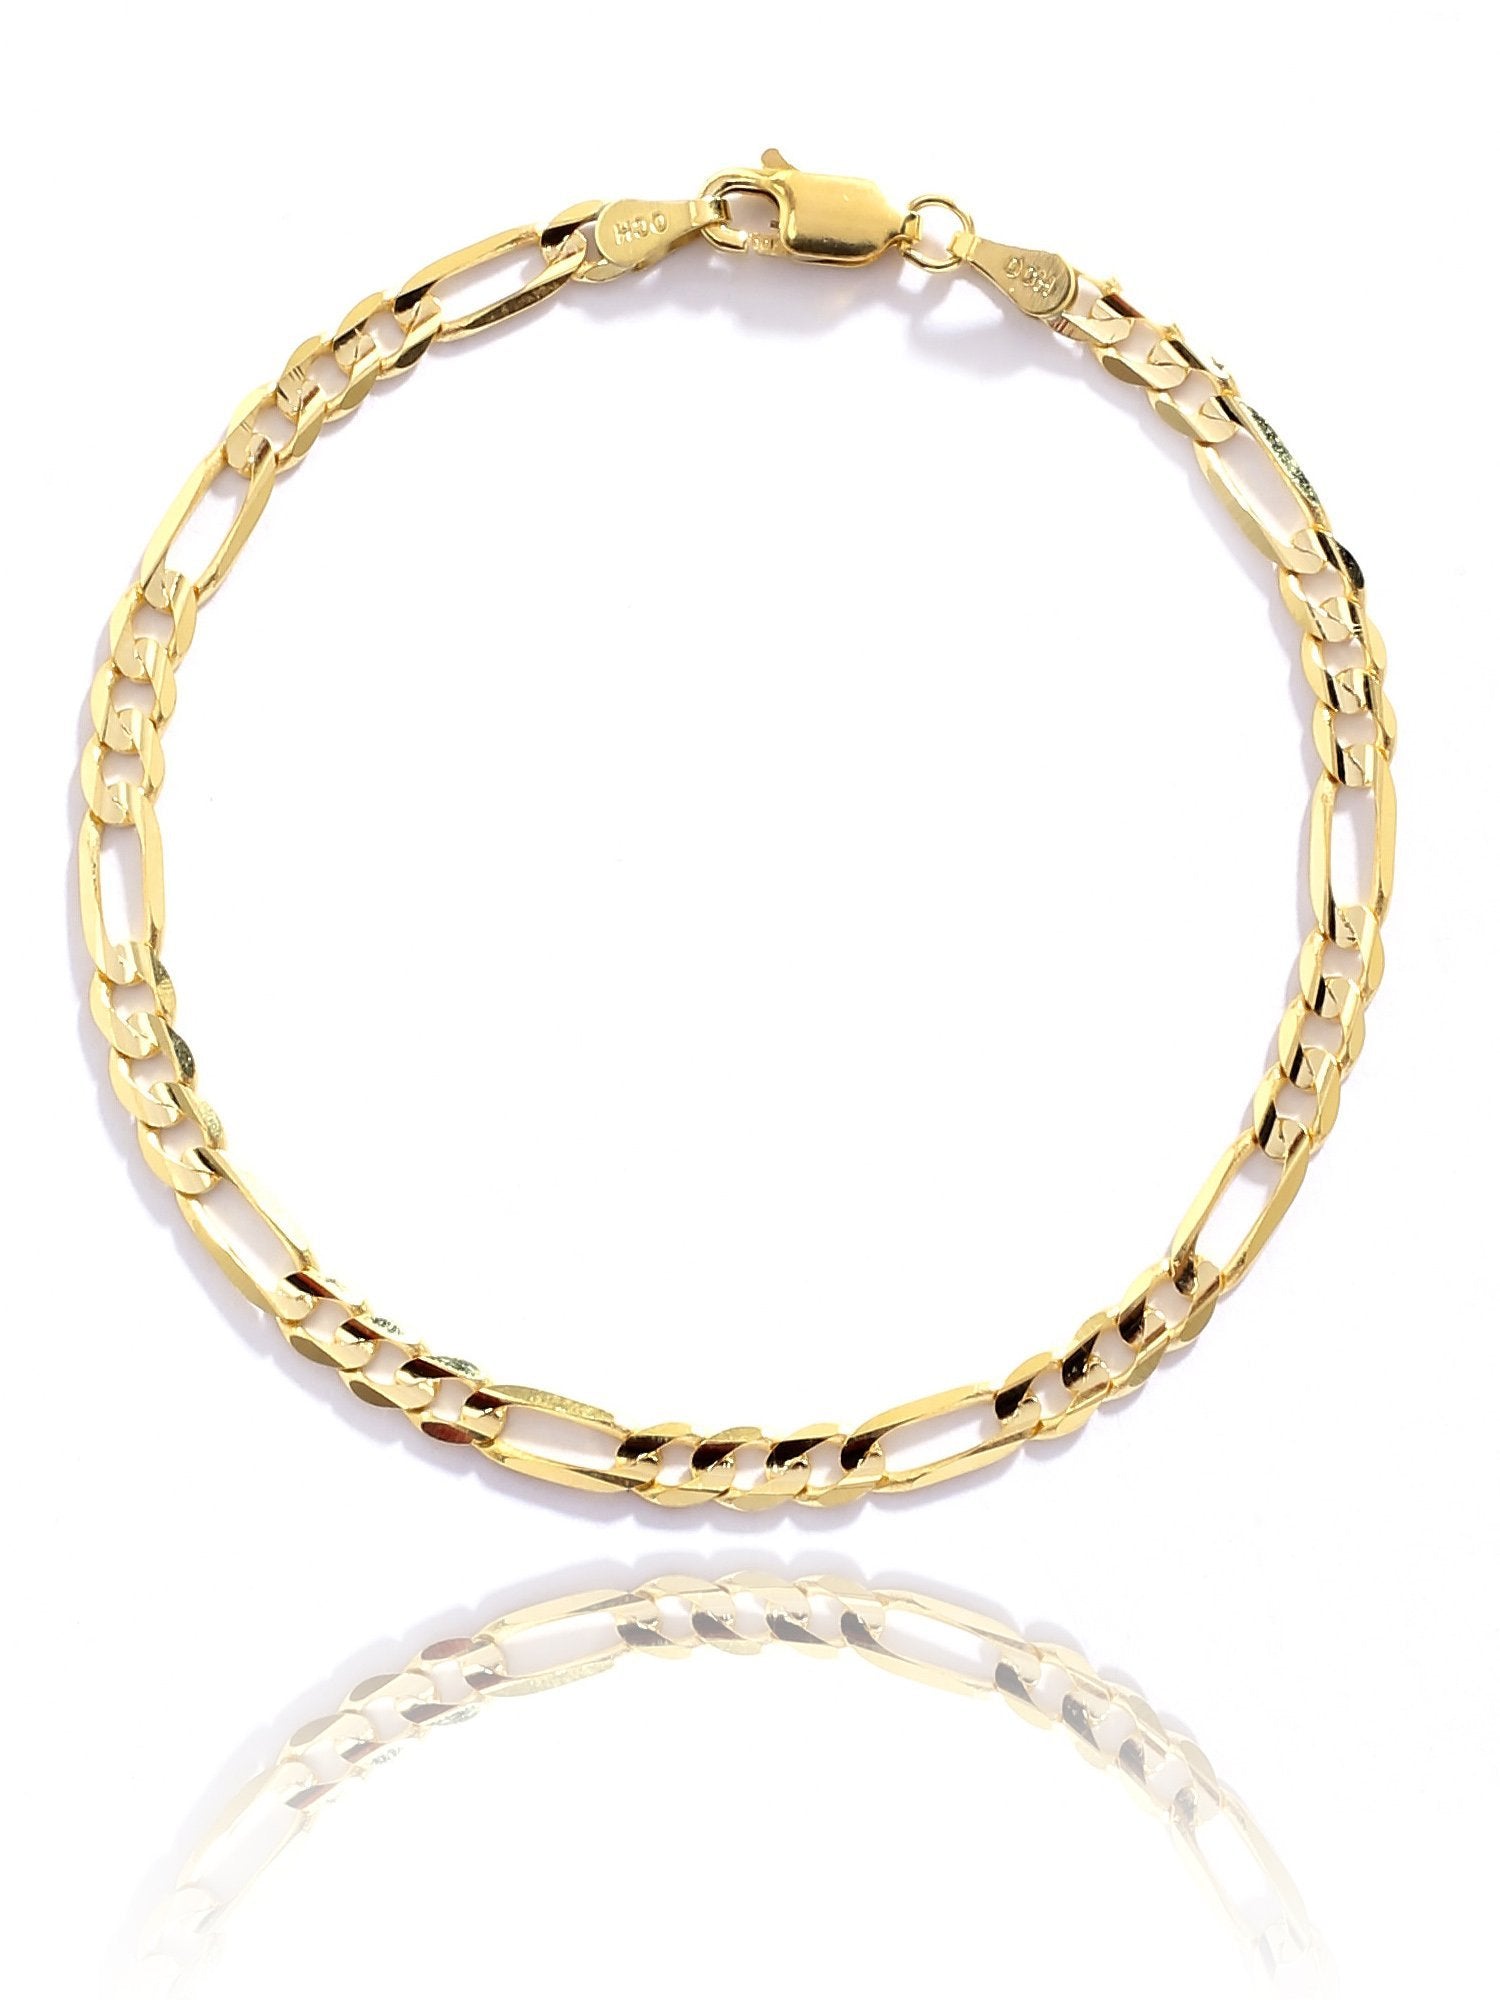 10k Yallow Gold Figaro Chain Bracelet with Concave Look, 0.22 Inch (5.7mm)